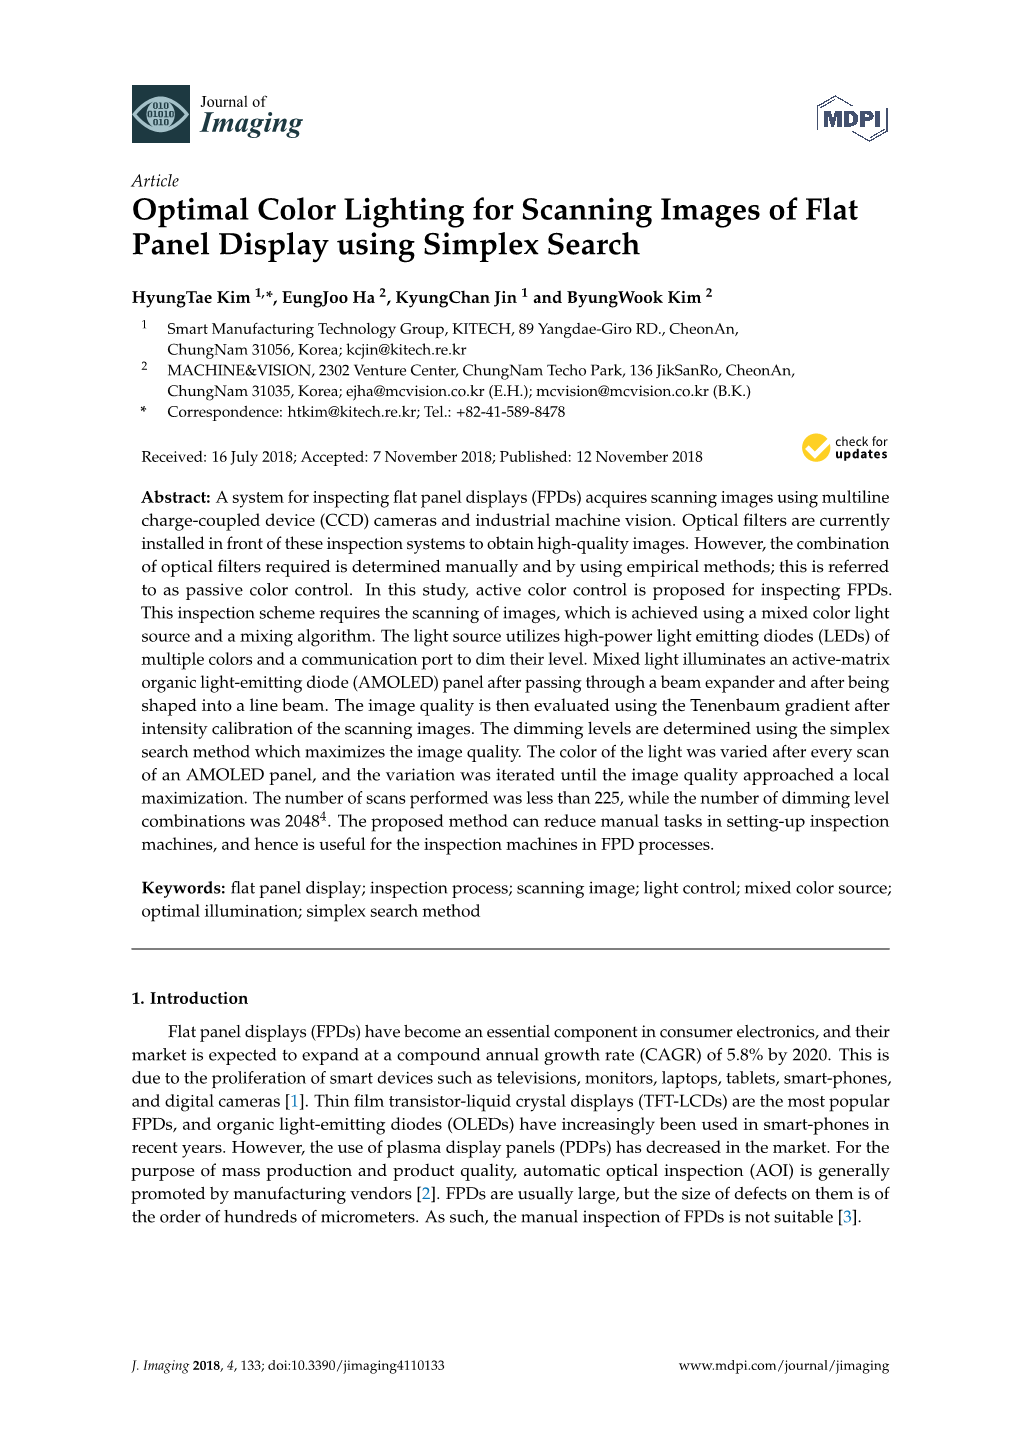 Optimal Color Lighting for Scanning Images of Flat Panel Display Using Simplex Search